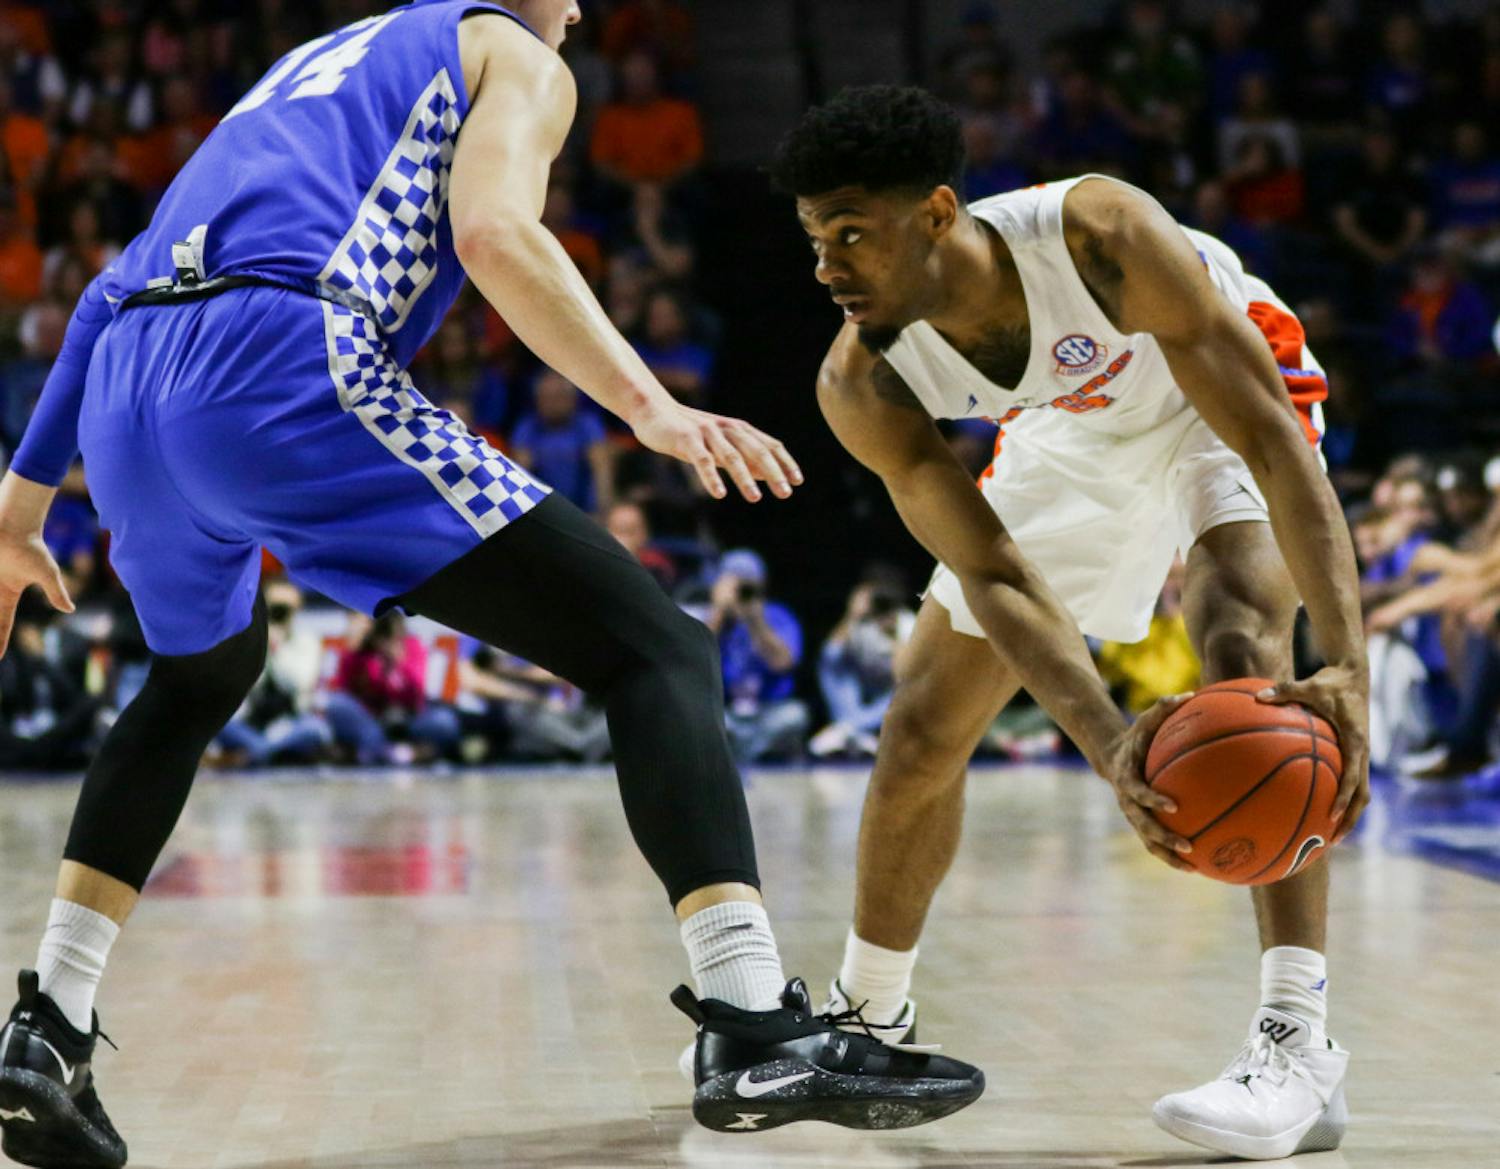 Florida guard Jalen Hudson scored 15 points on 5-of-12 shooting in UF's 73-61 loss to Tennessee on Saturday. 